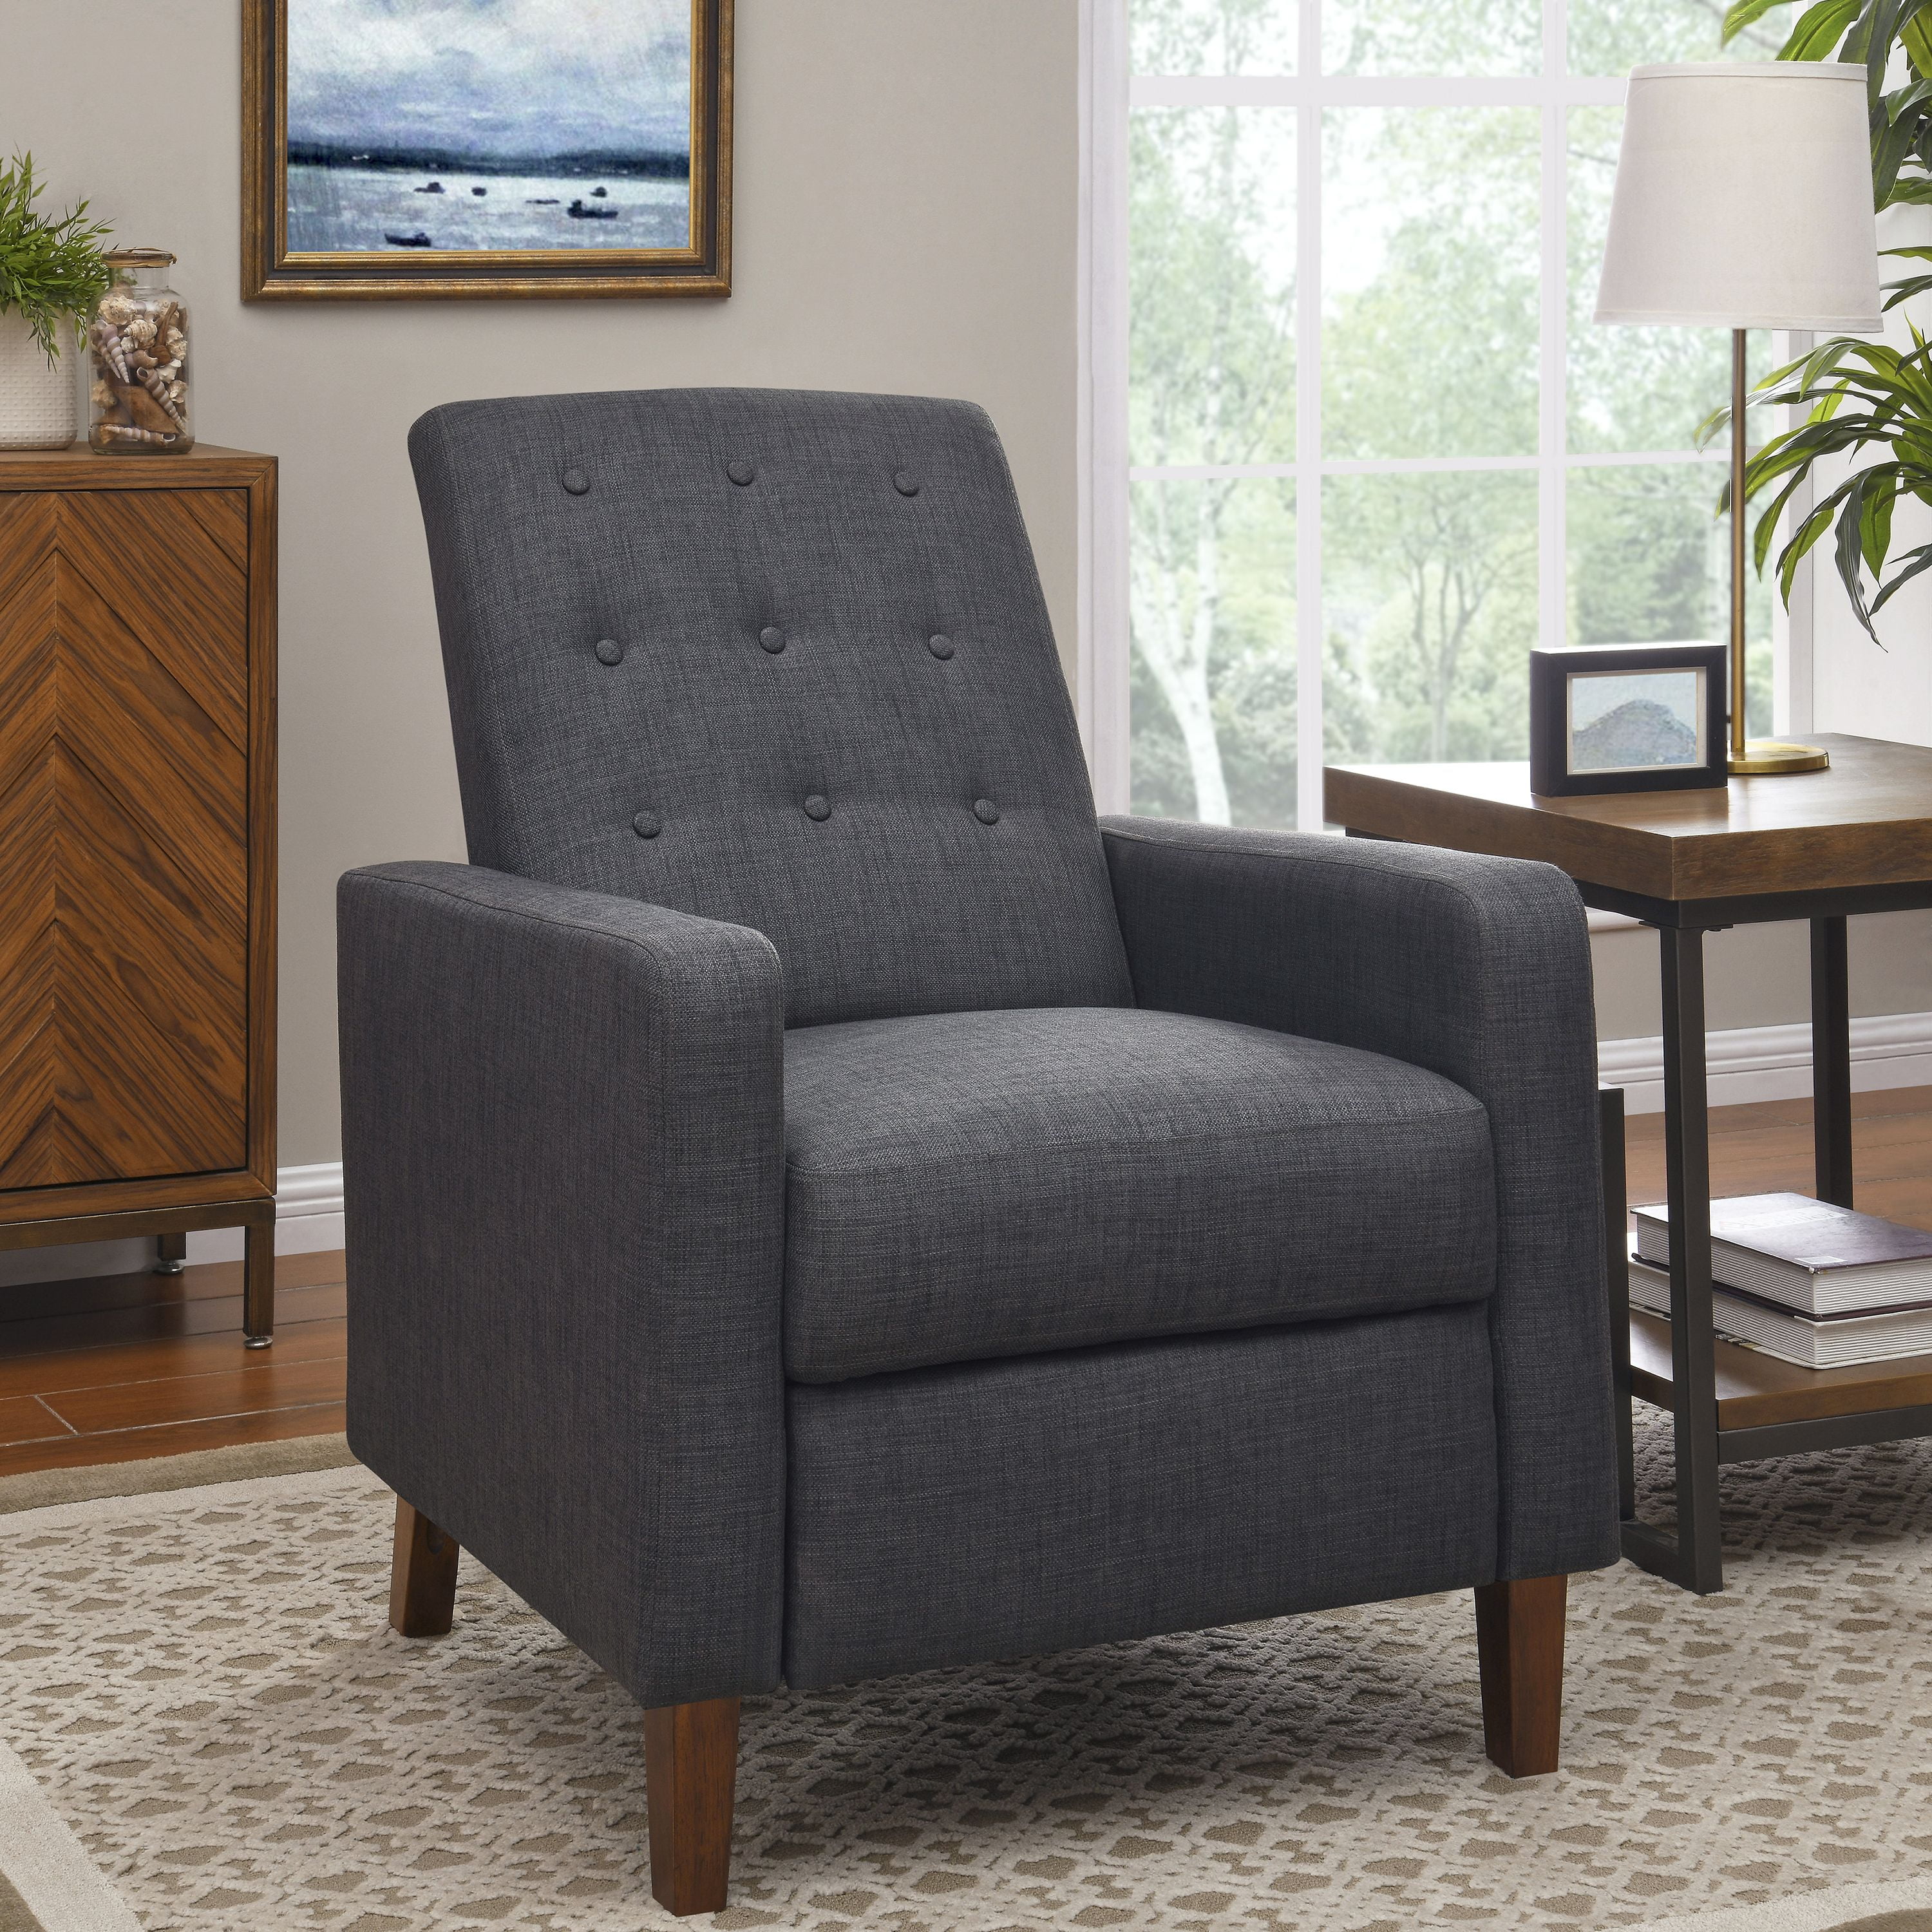 Better Homes & Gardens Gracie Pushback Recliner, Multiple Colors ...